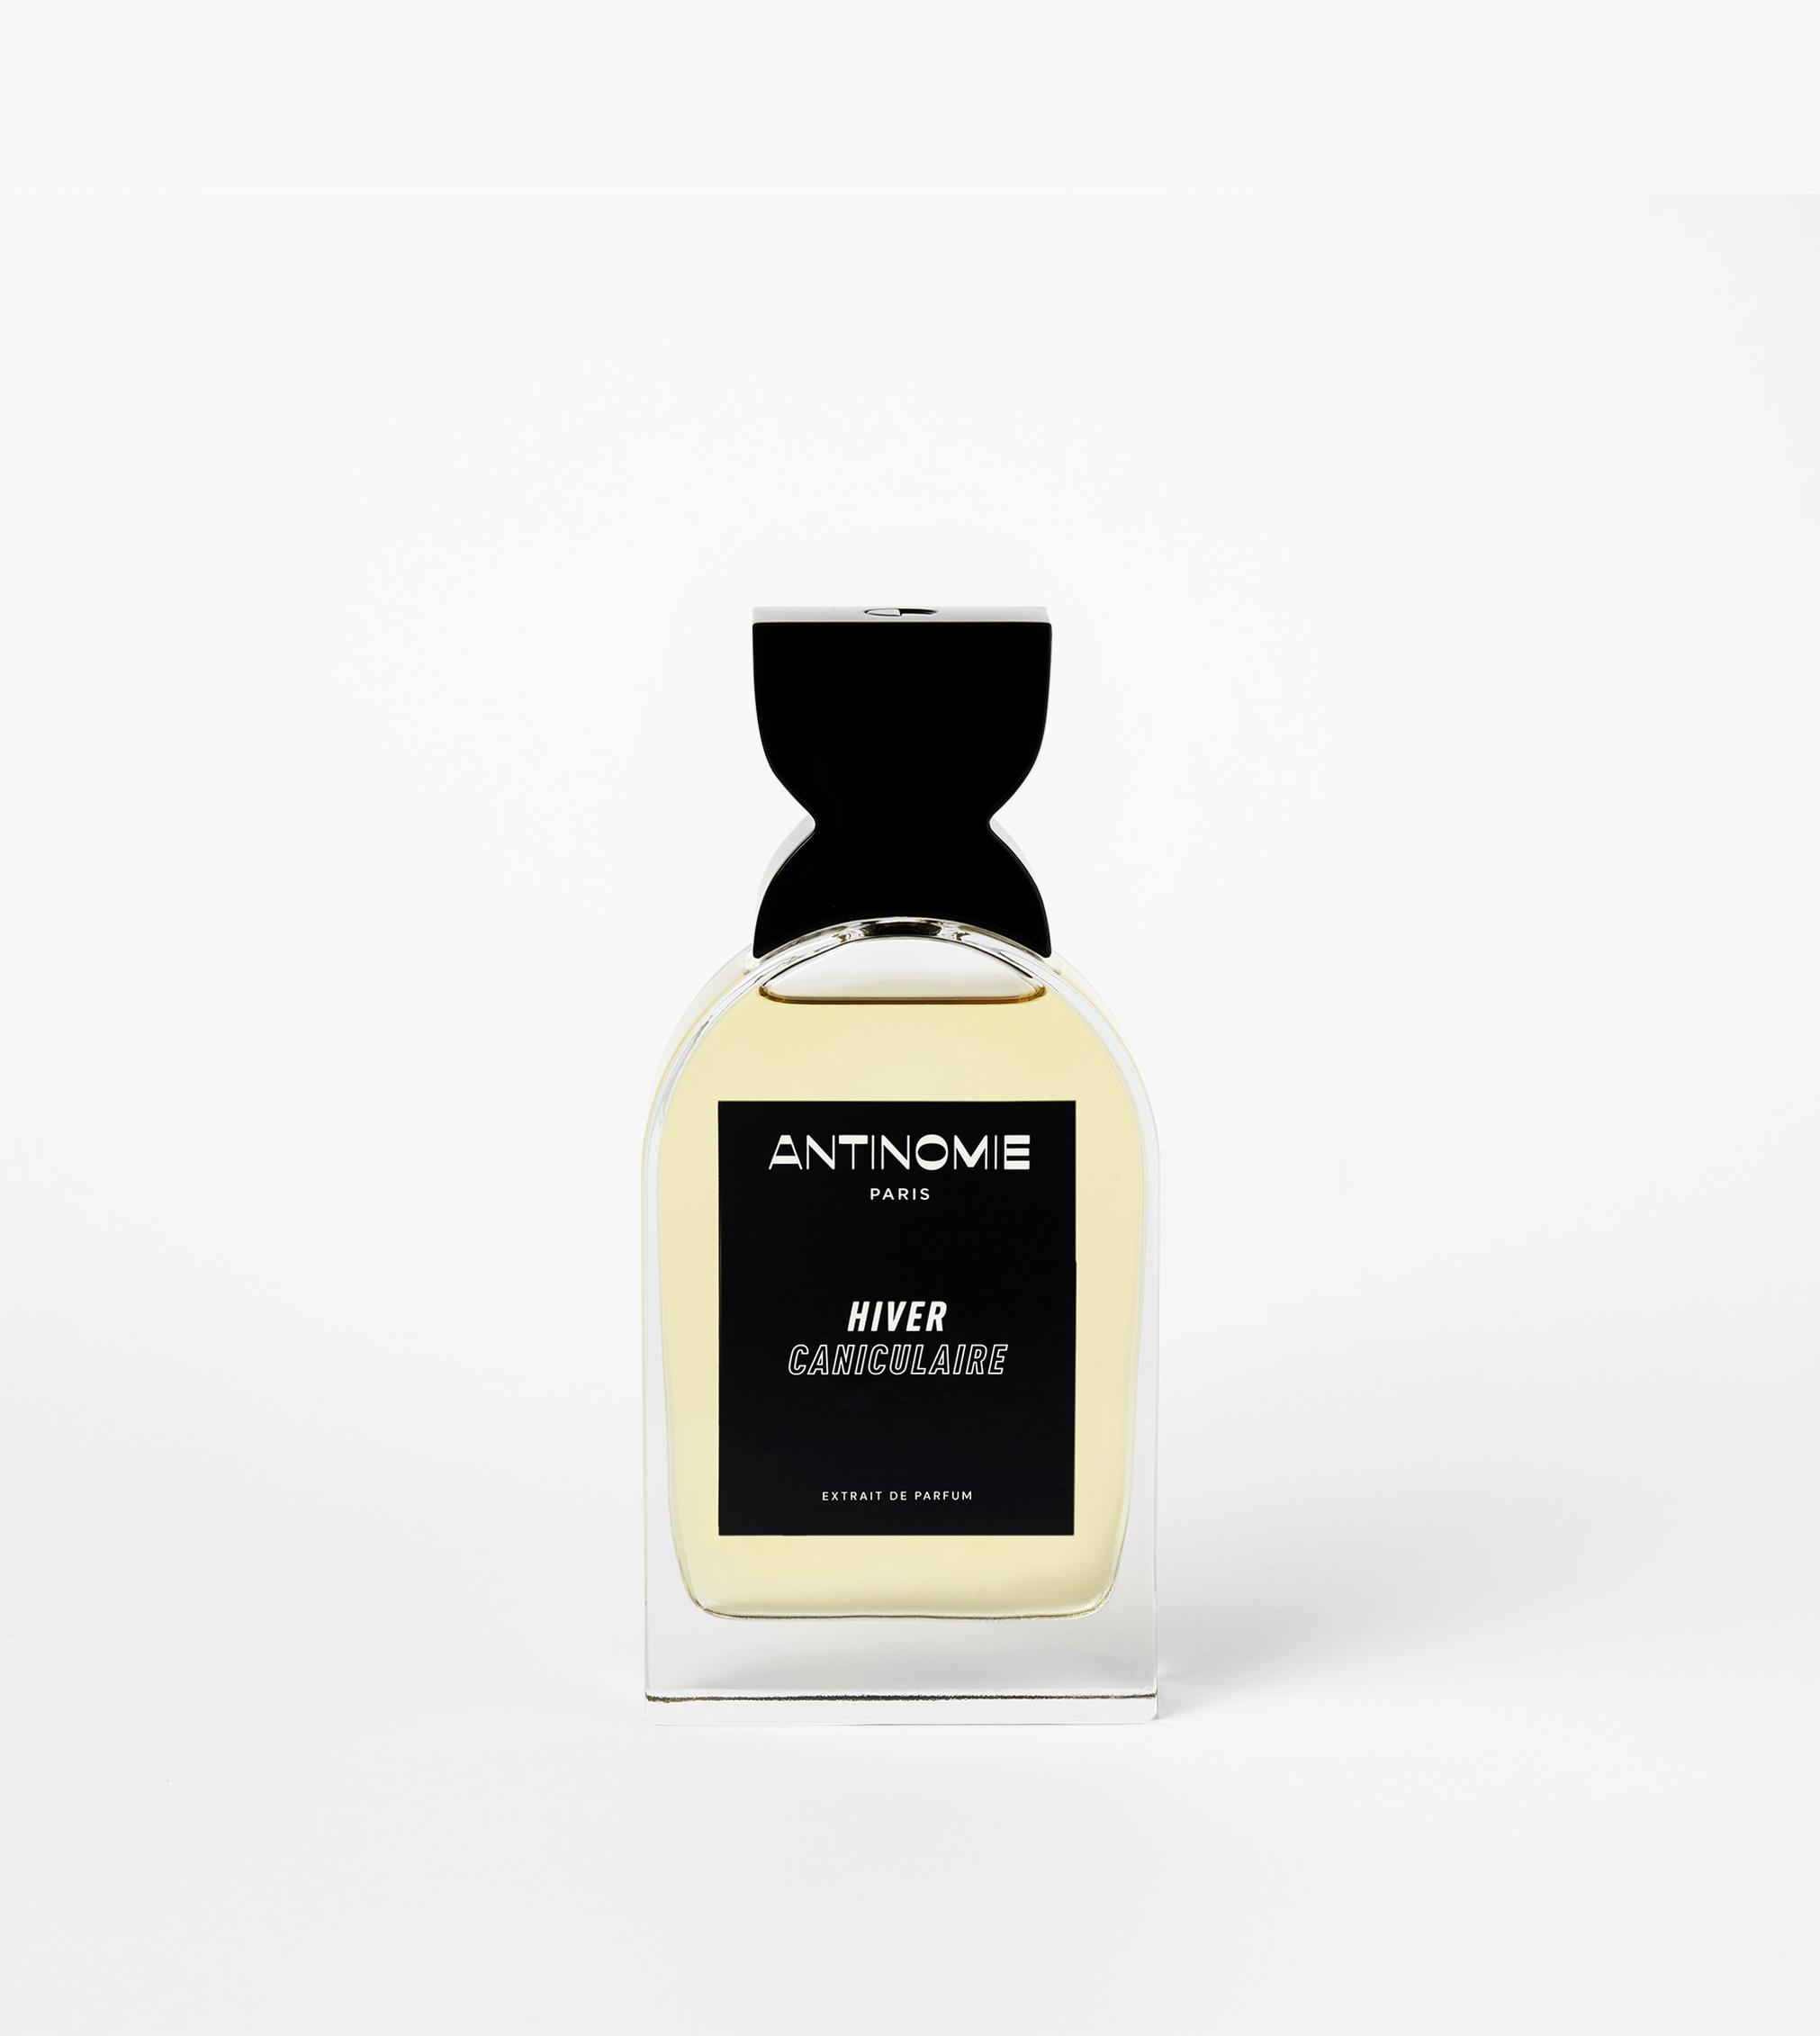 https://www.antinomieparfum.com/wp-content/uploads/2021/06/HIVER-CANICULAIRE-FORNT-SIDE.jpg